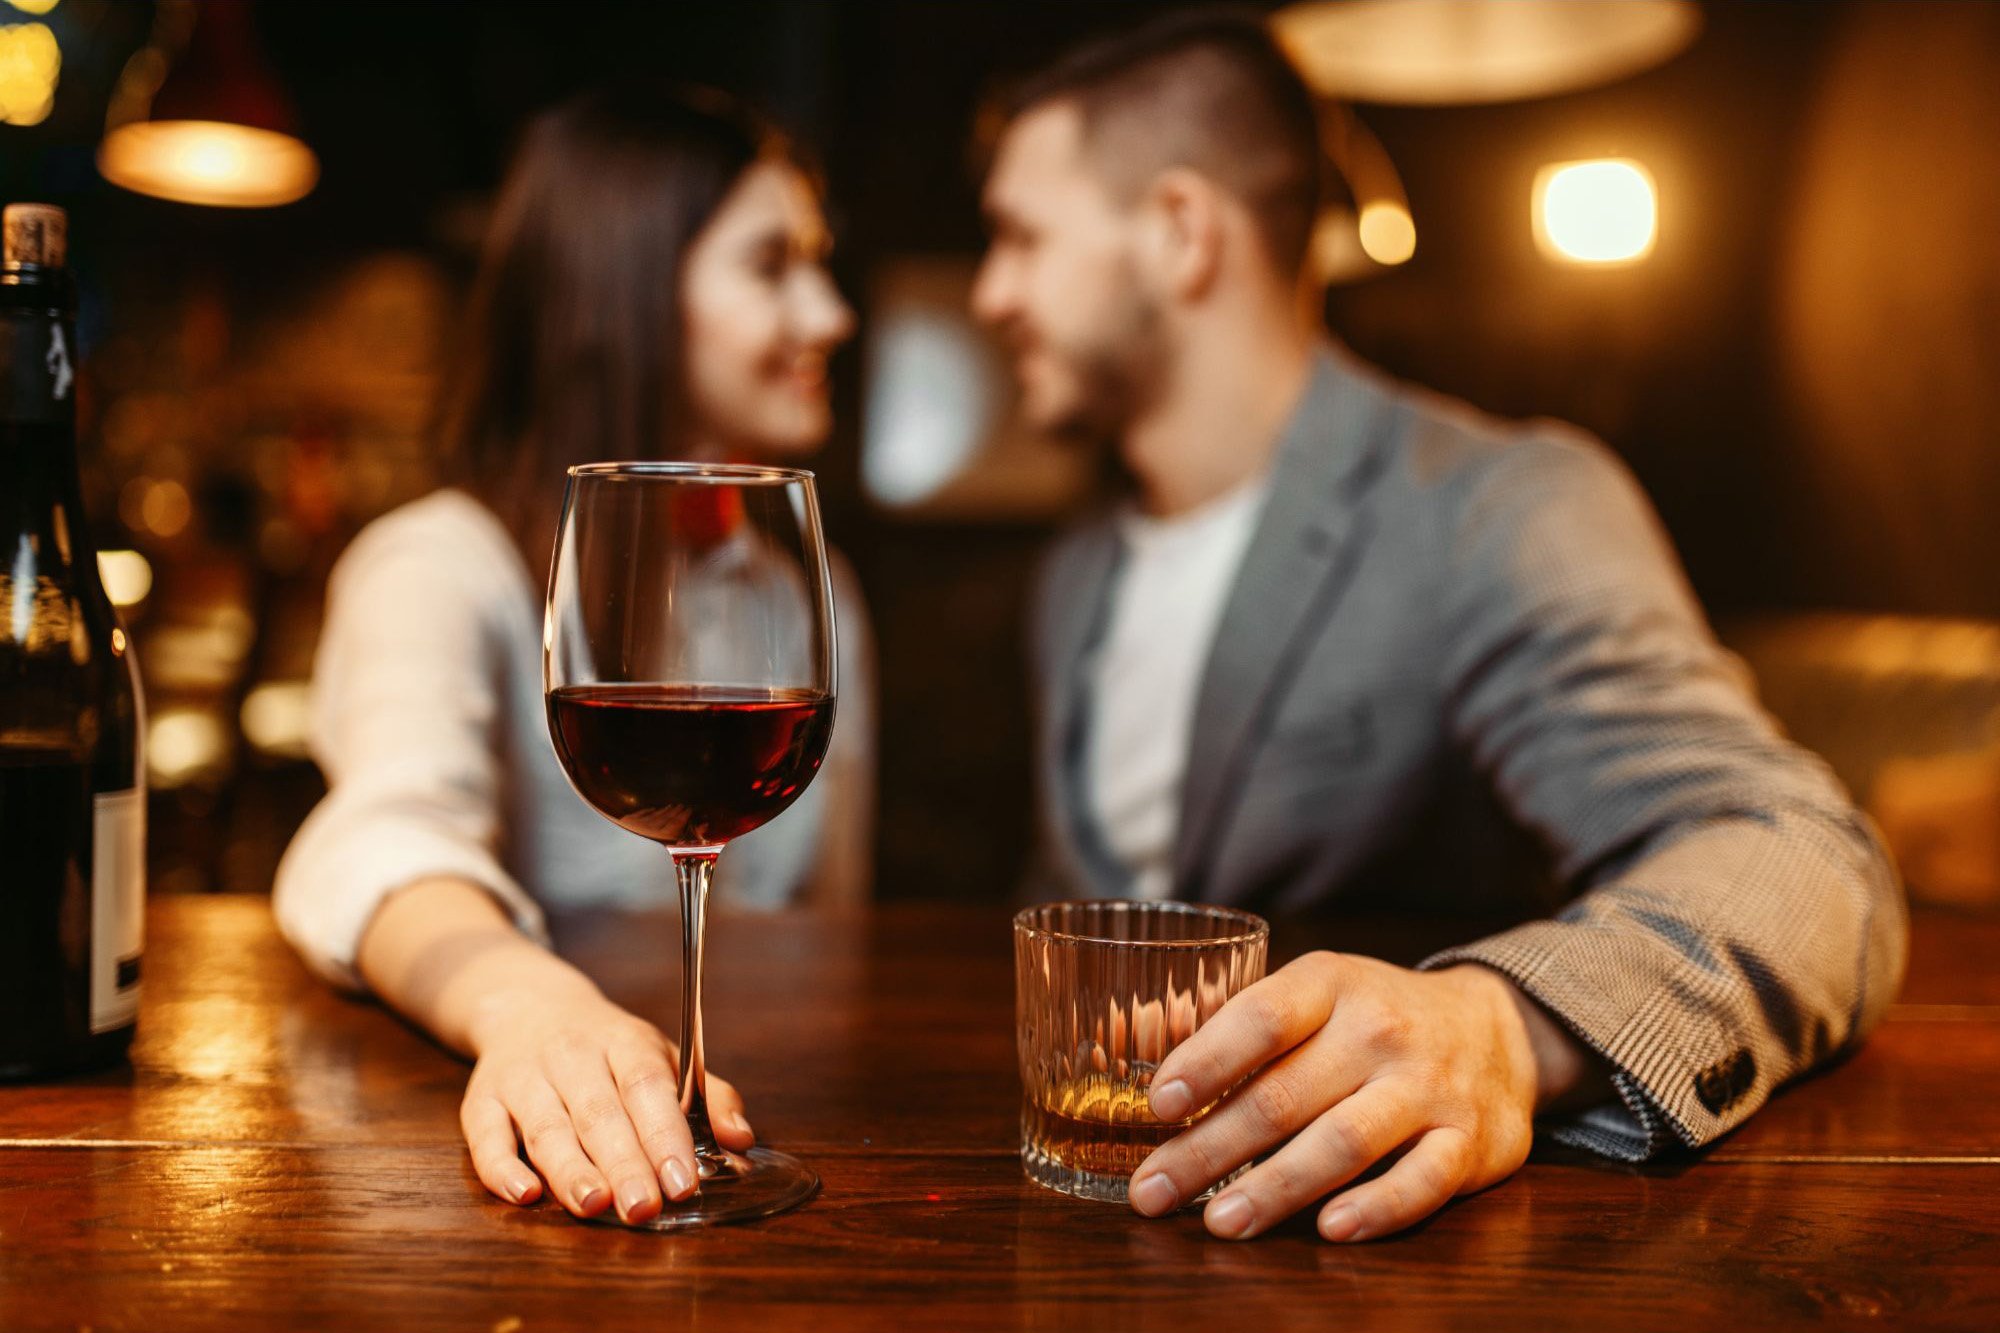 Couple-Drinking-Together-Bar.jpg